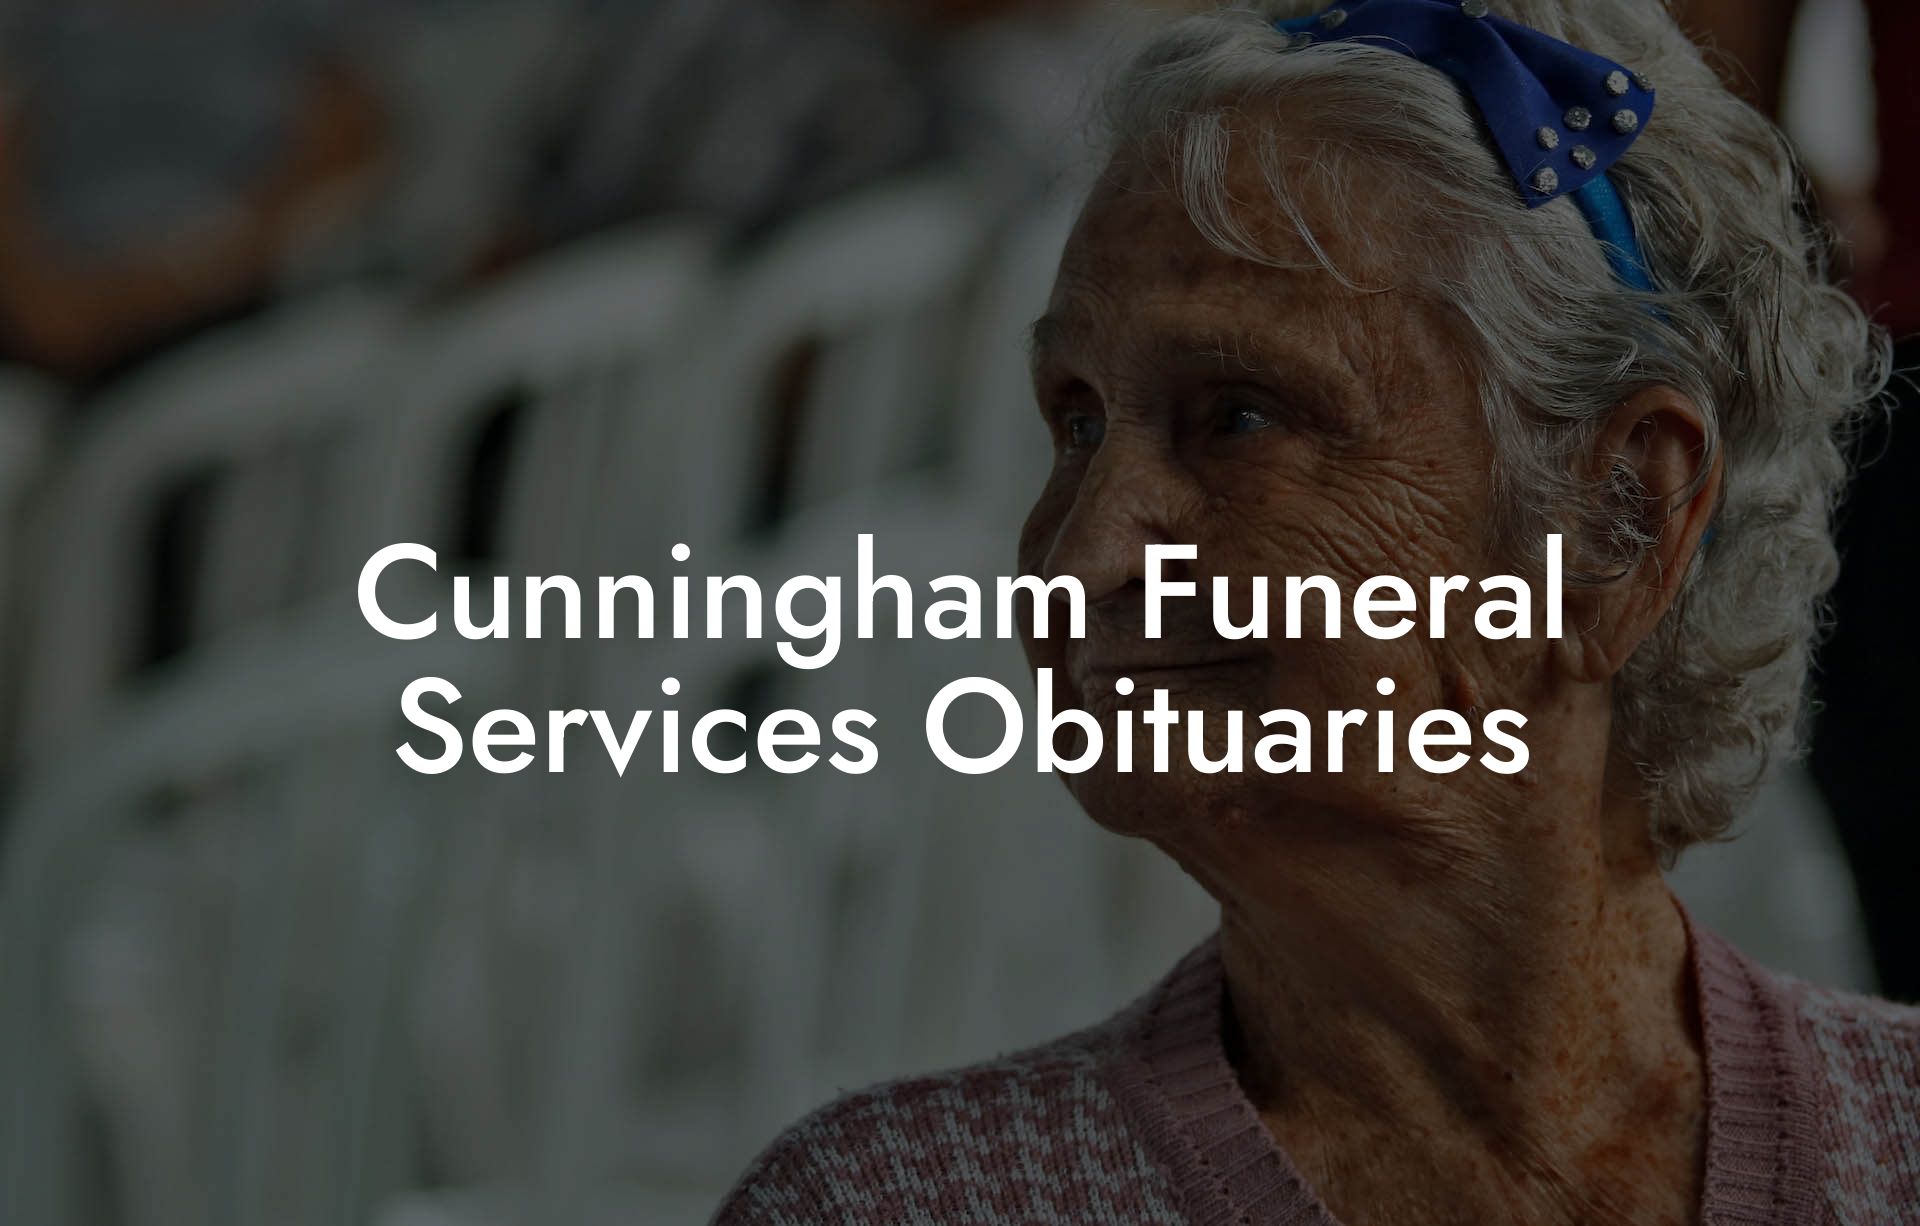 Cunningham Funeral Services Obituaries